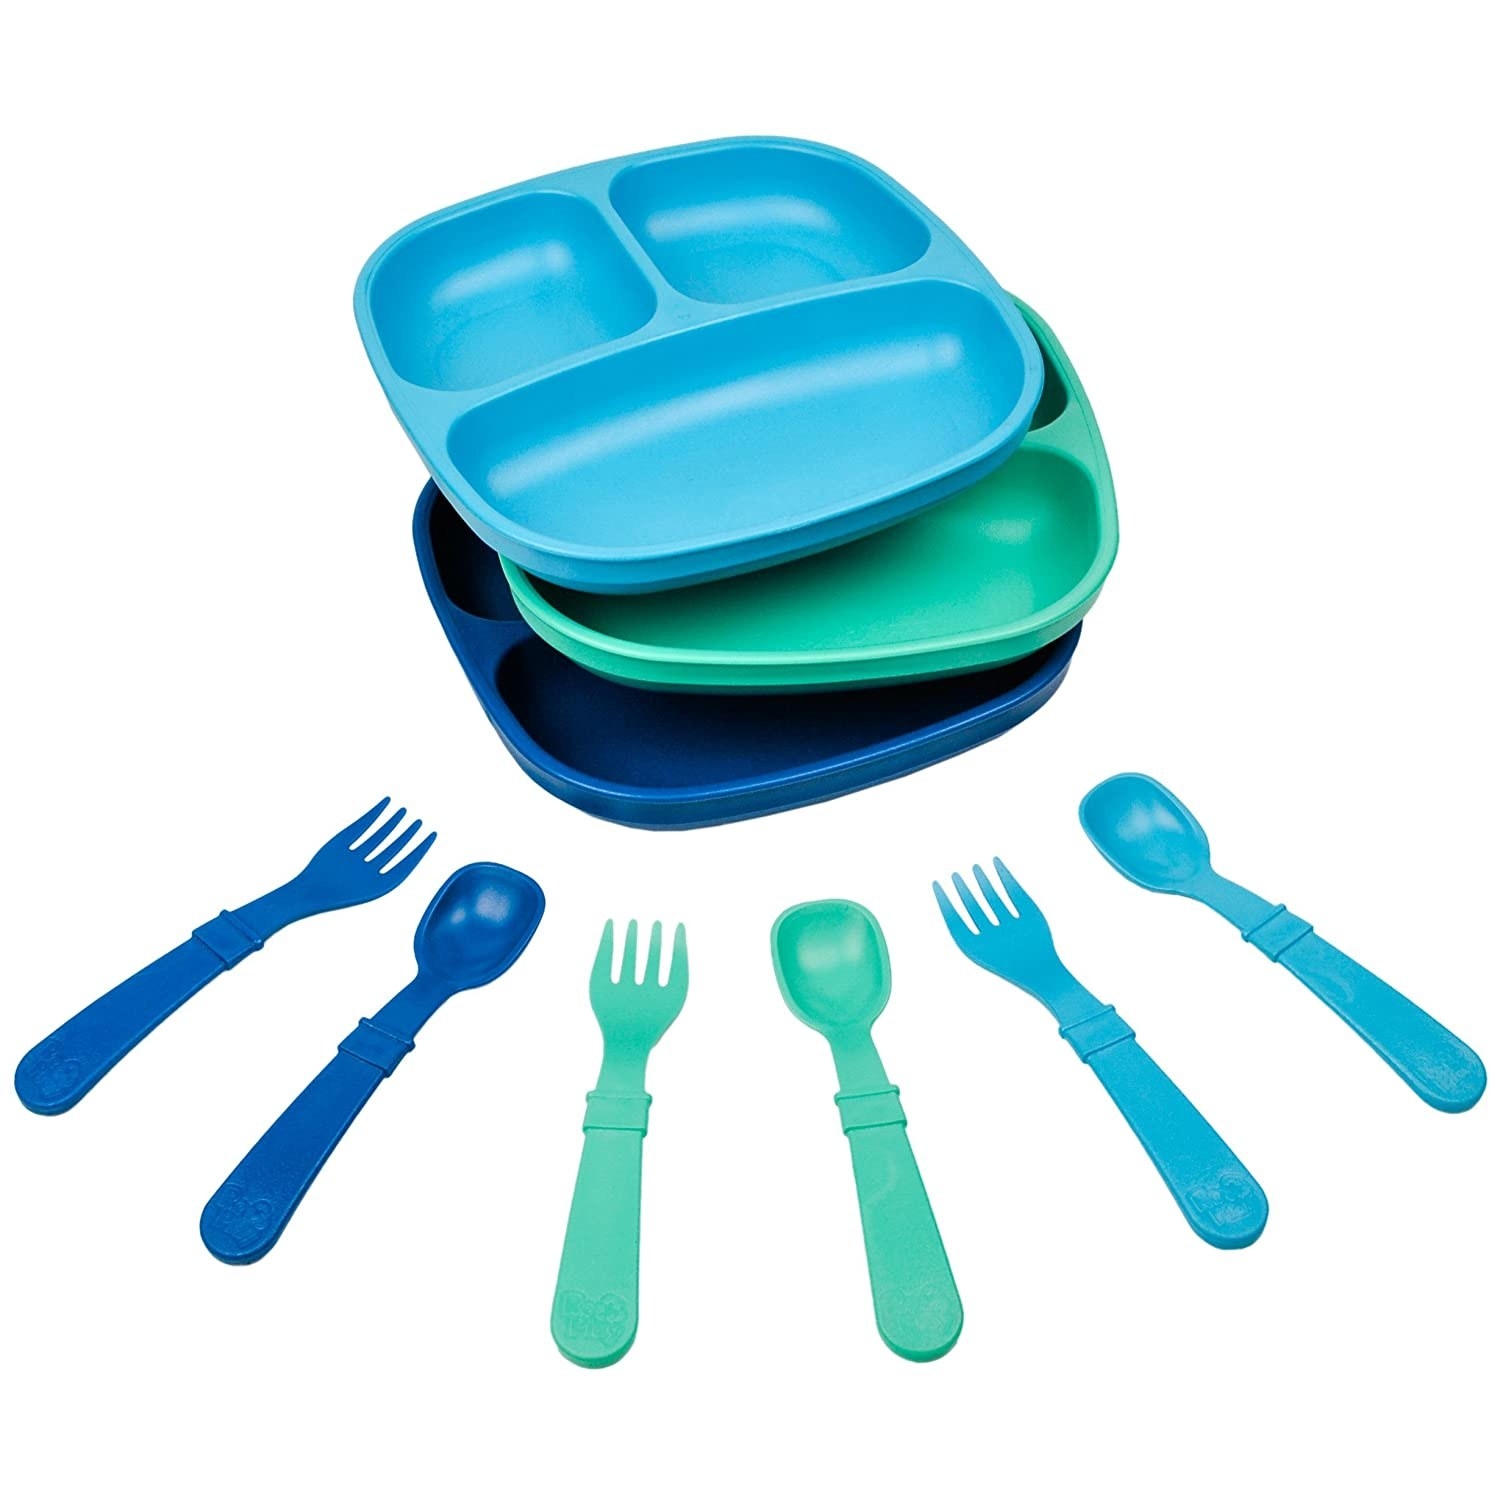 A teal and blue set with three plates and matching flatware, made from recycled milk jugs.